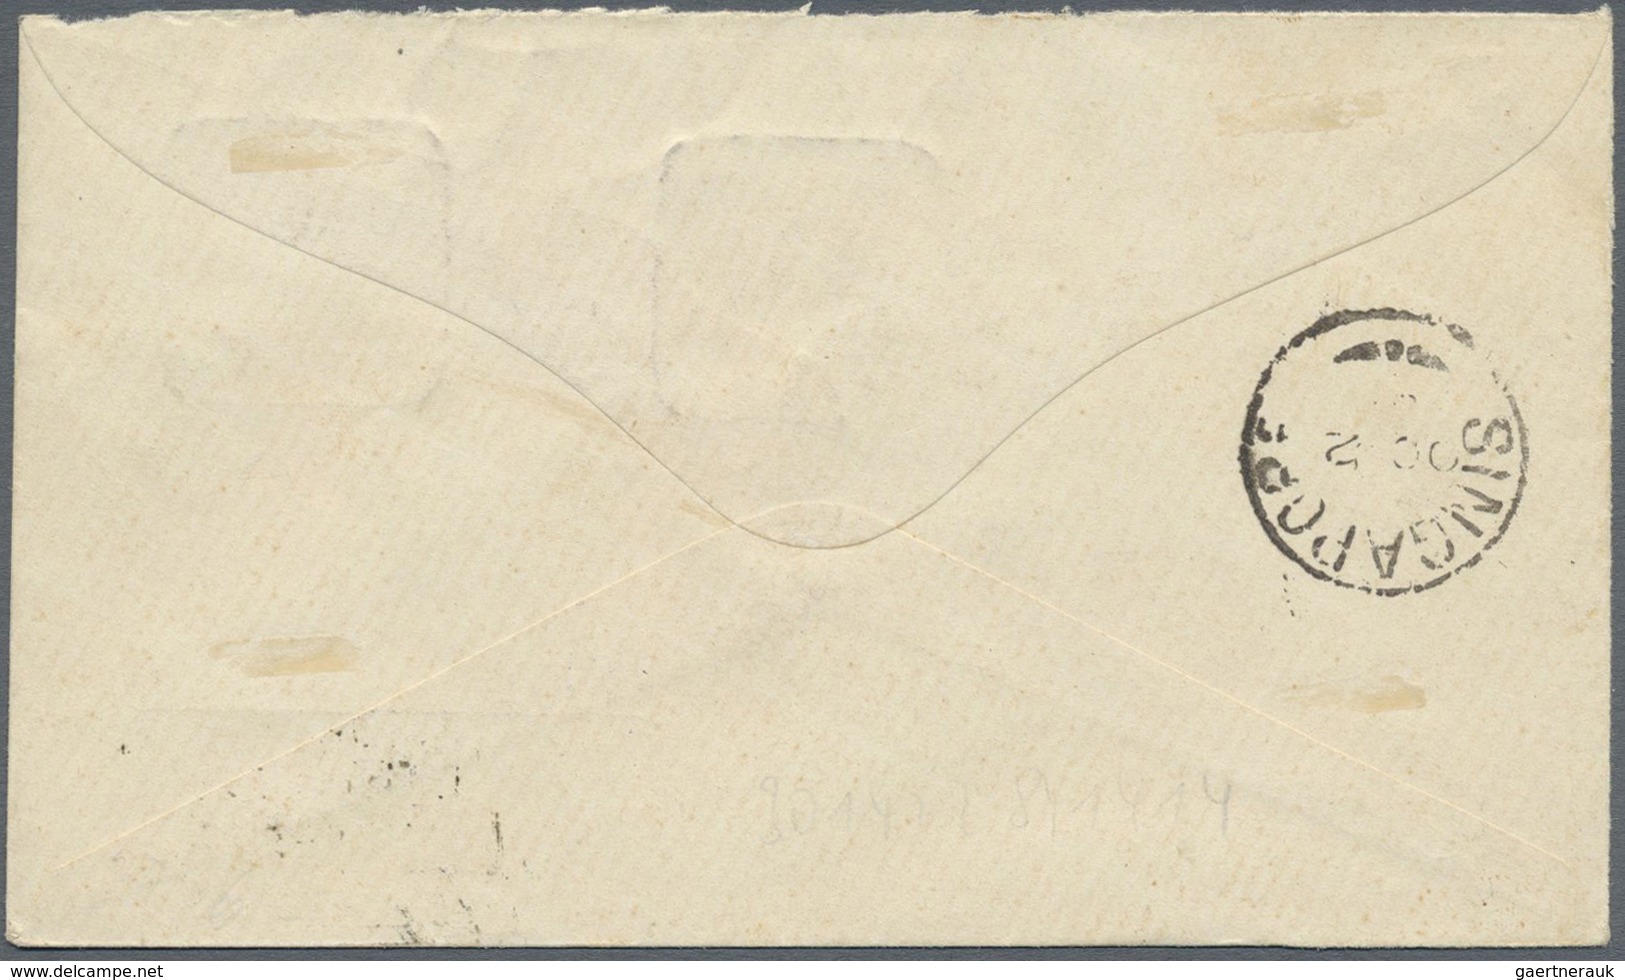 Br Malaiische Staaten - Perak: 1895 Registered Cover From Teluk Anson To Singapore Franked 1892-95 1c., - Perak